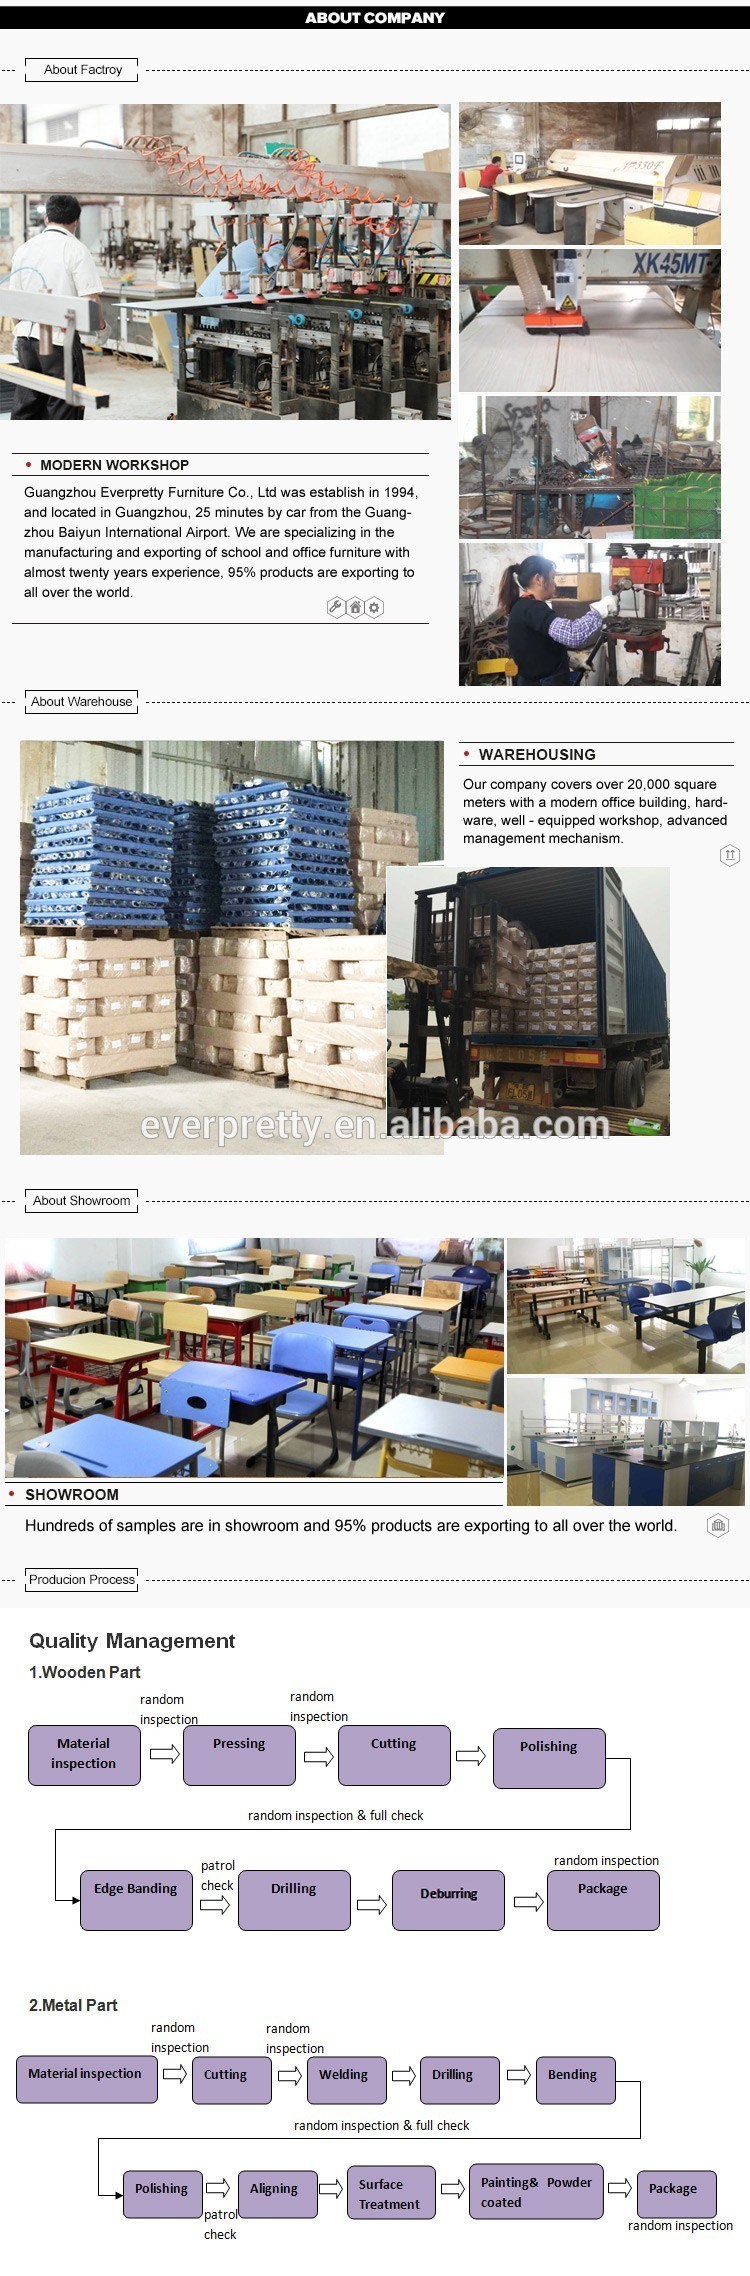 Banquet Chair, Wholesale Banquet Chairs, Used Banquet Chairs for Sale